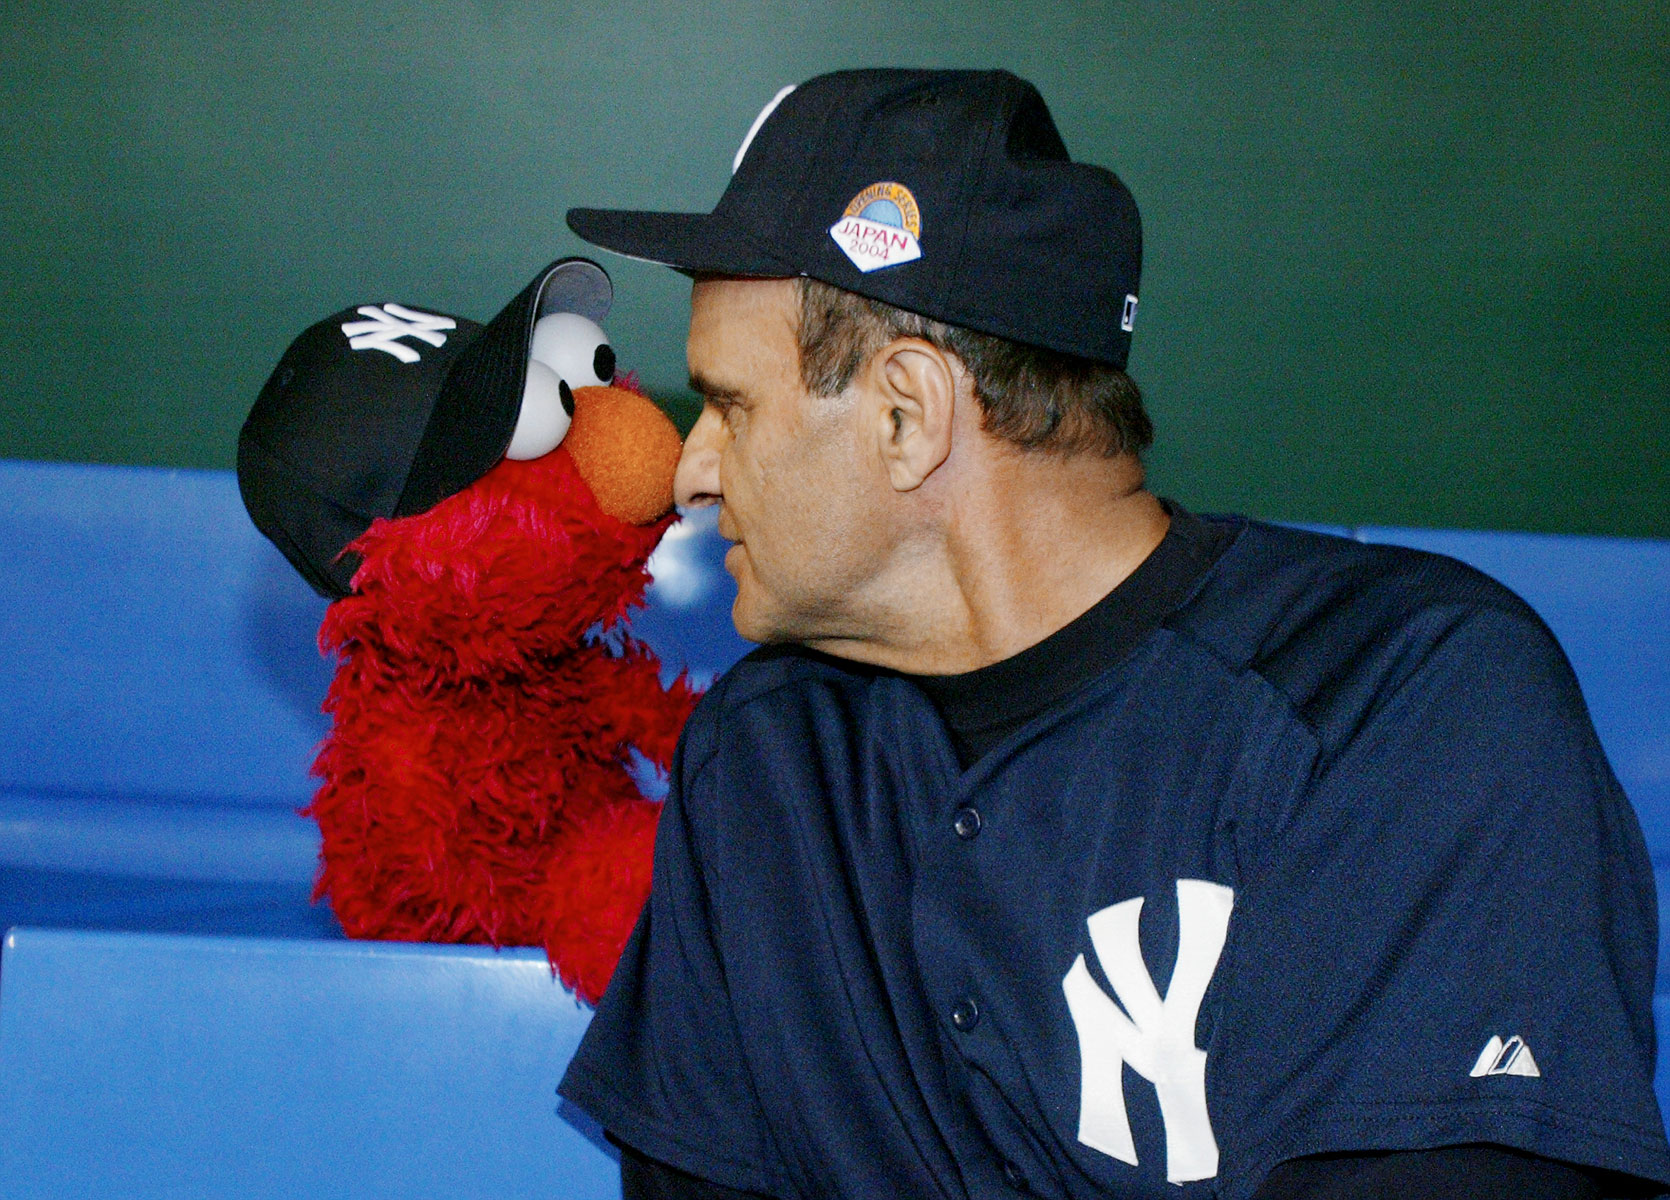 New York Yankees' manager Joe Torre and Elmo compare noses before an exhibition game against Hideki Matsui's former team, the Yomiuri Giants, at the Tokyo Dome in Tokyo, Japan.